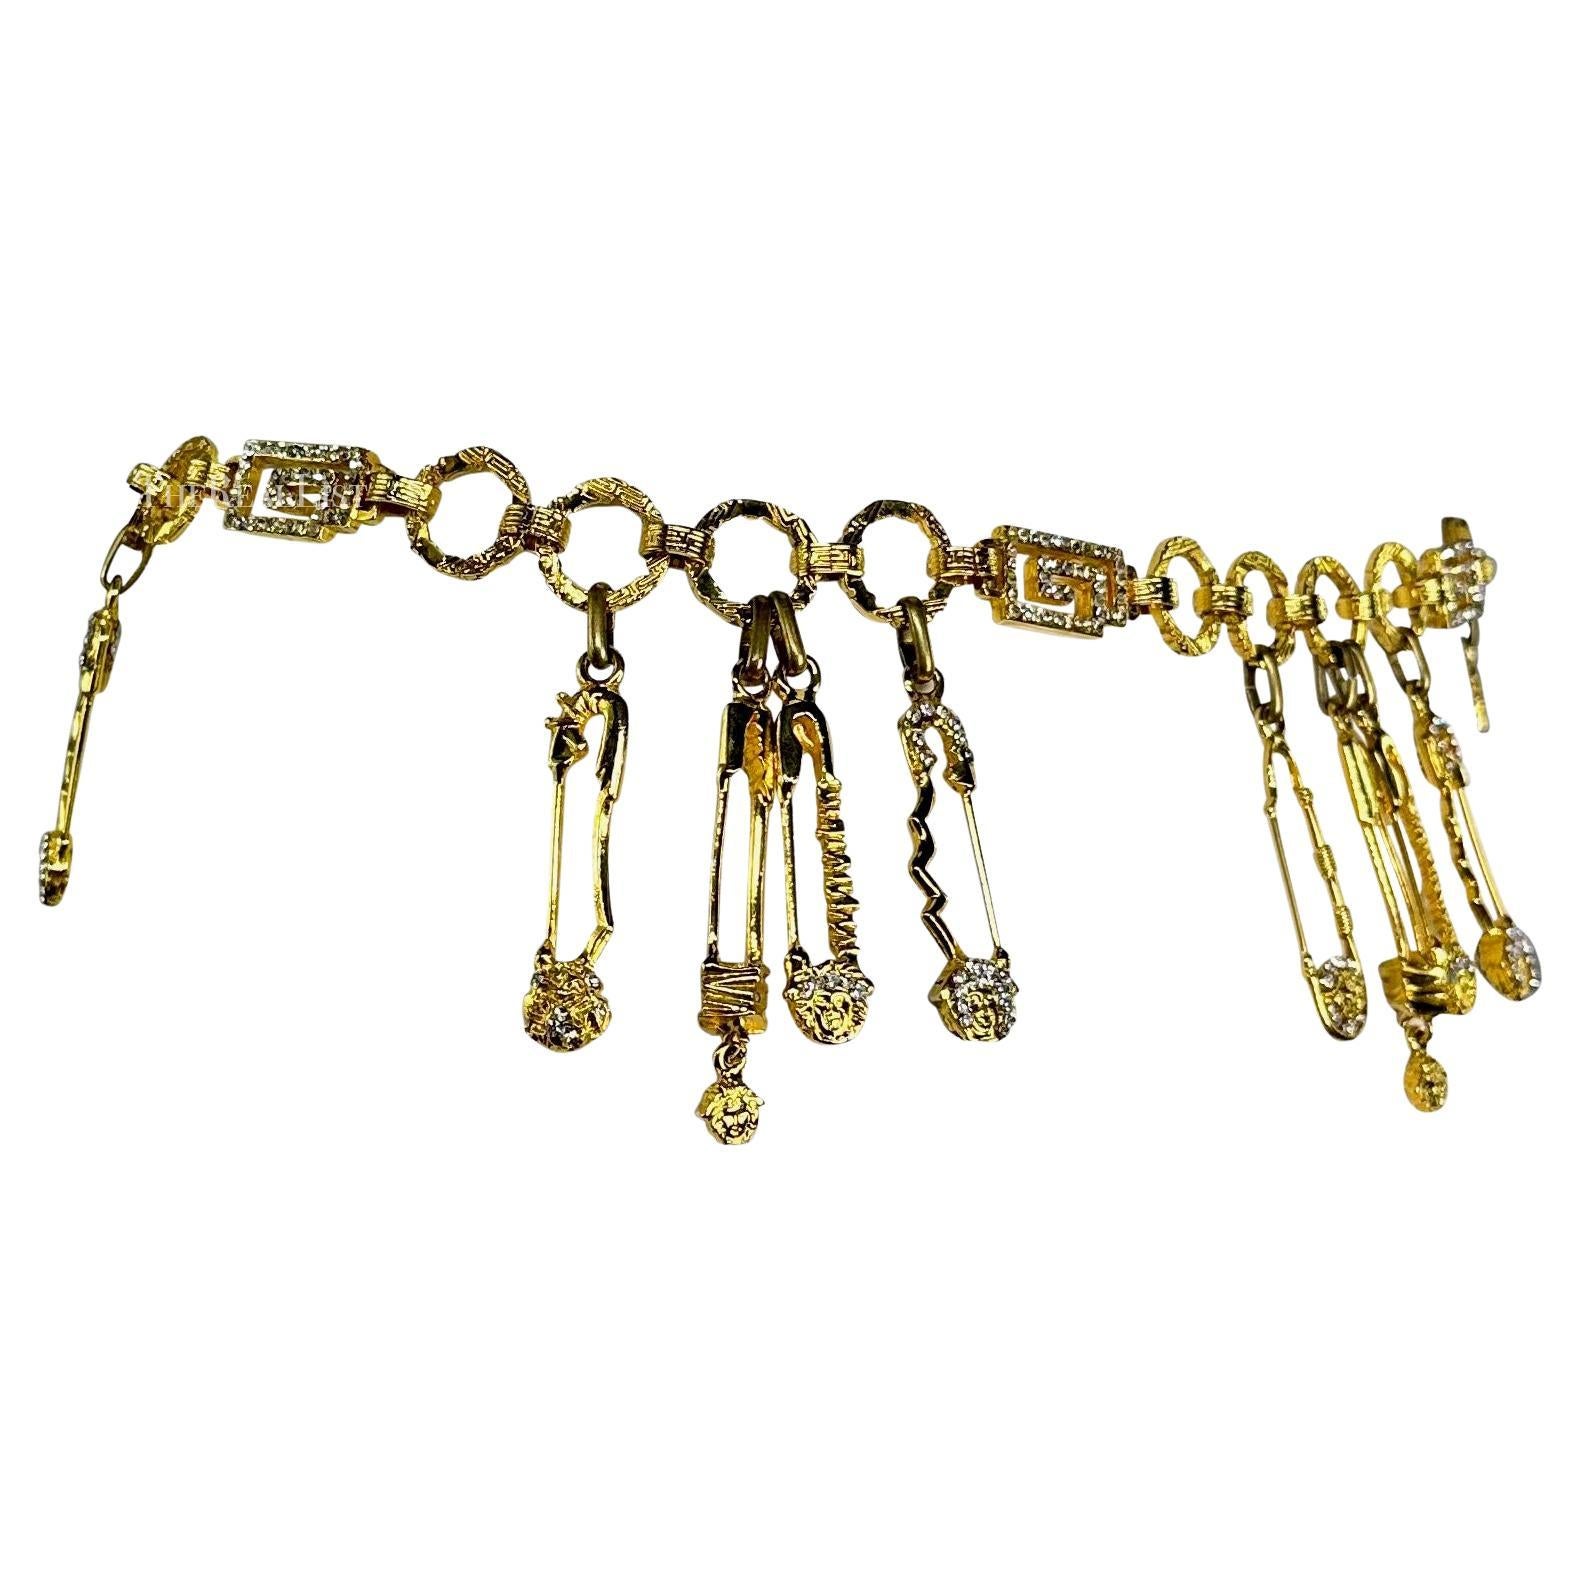 S/S 1994 Gianni Versace Gold Tone Rhinestone Safety Pin Medusa Chain Belt  For Sale 4